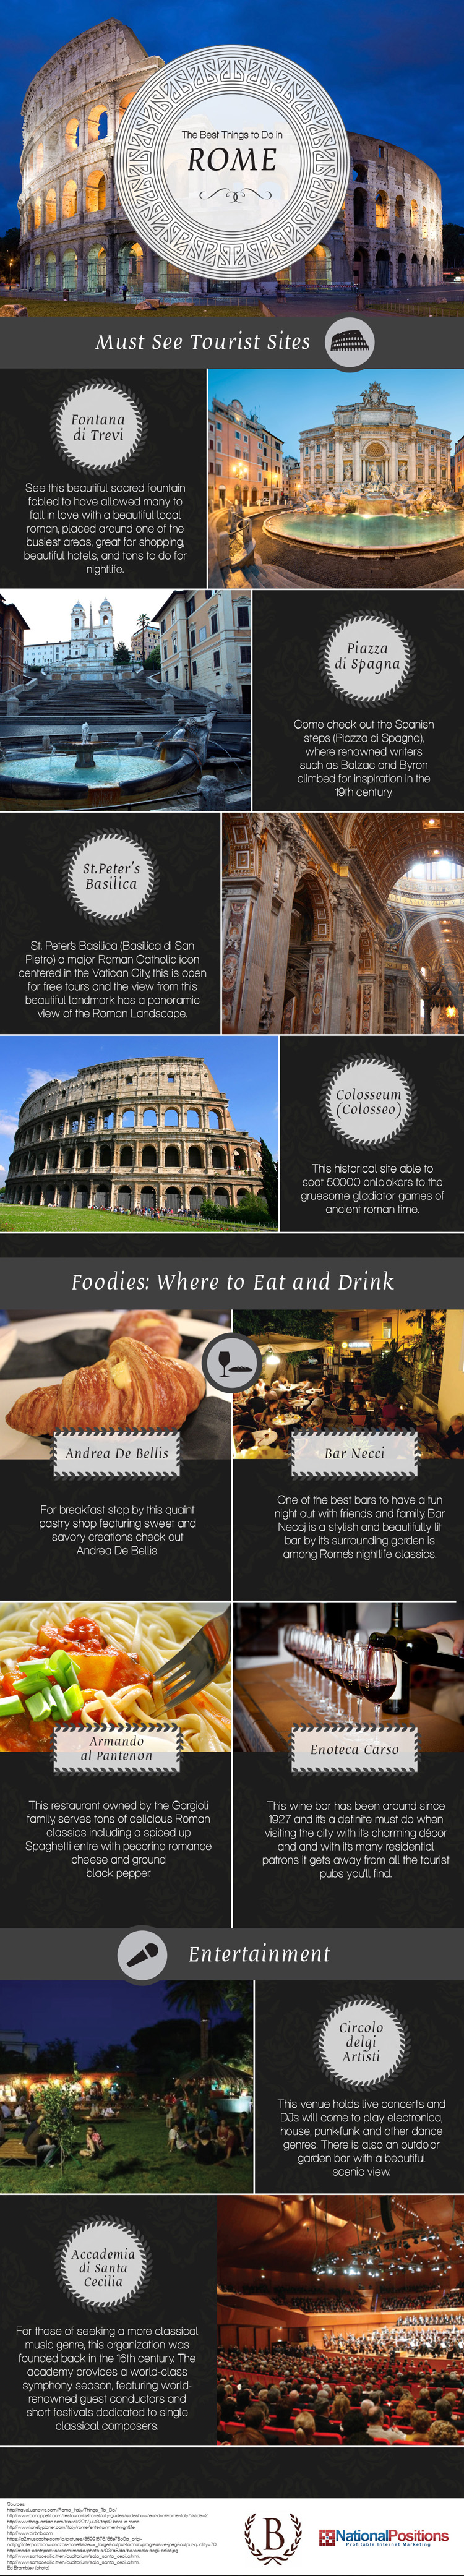 The Best Things to Do in Rome